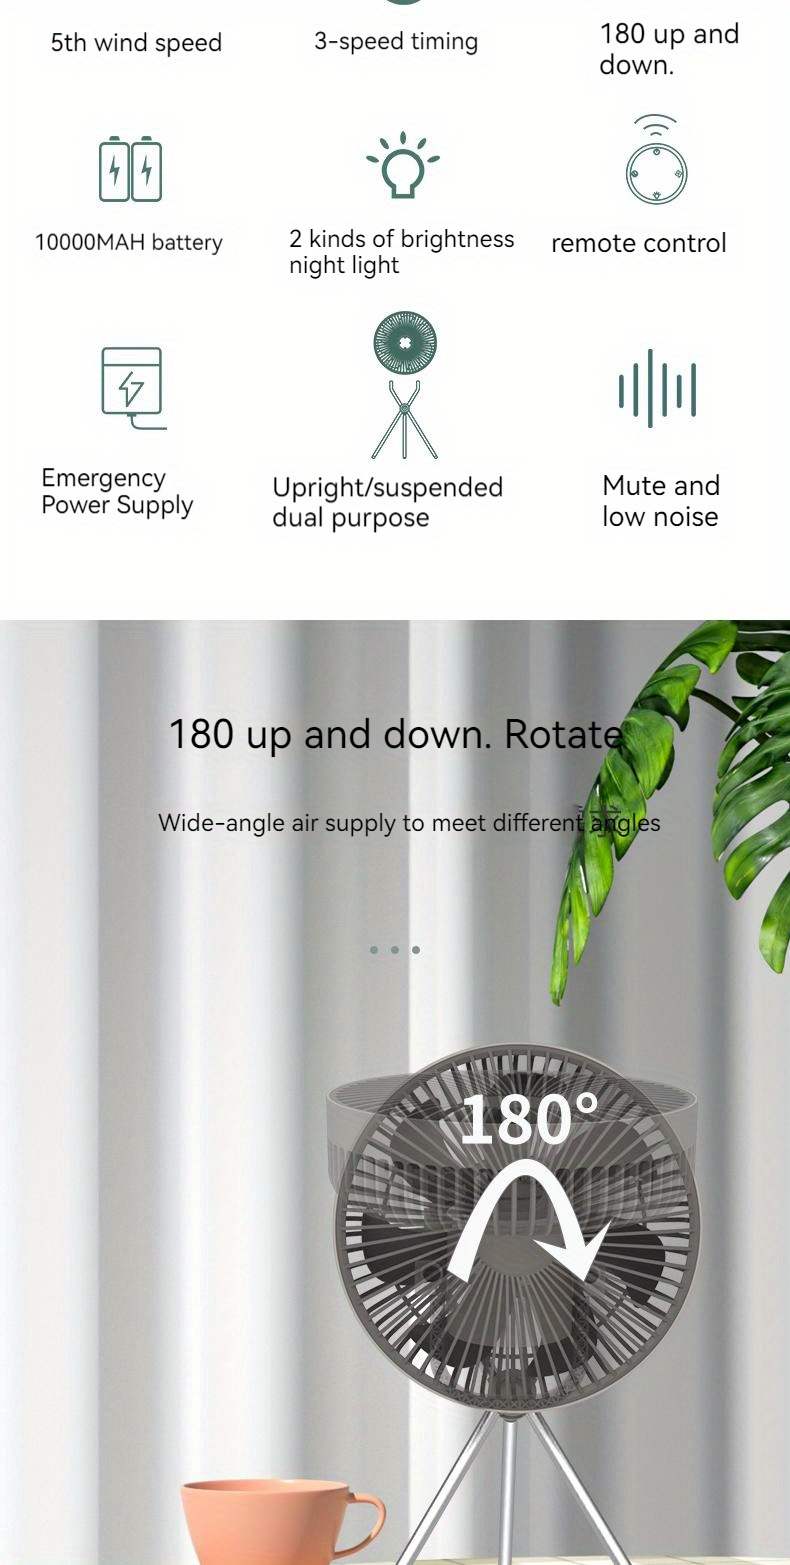 1pc outdoor small fan four speed wind adjustment 27 hours of long lasting battery life remote control magnetic suction design suspension timing details 1